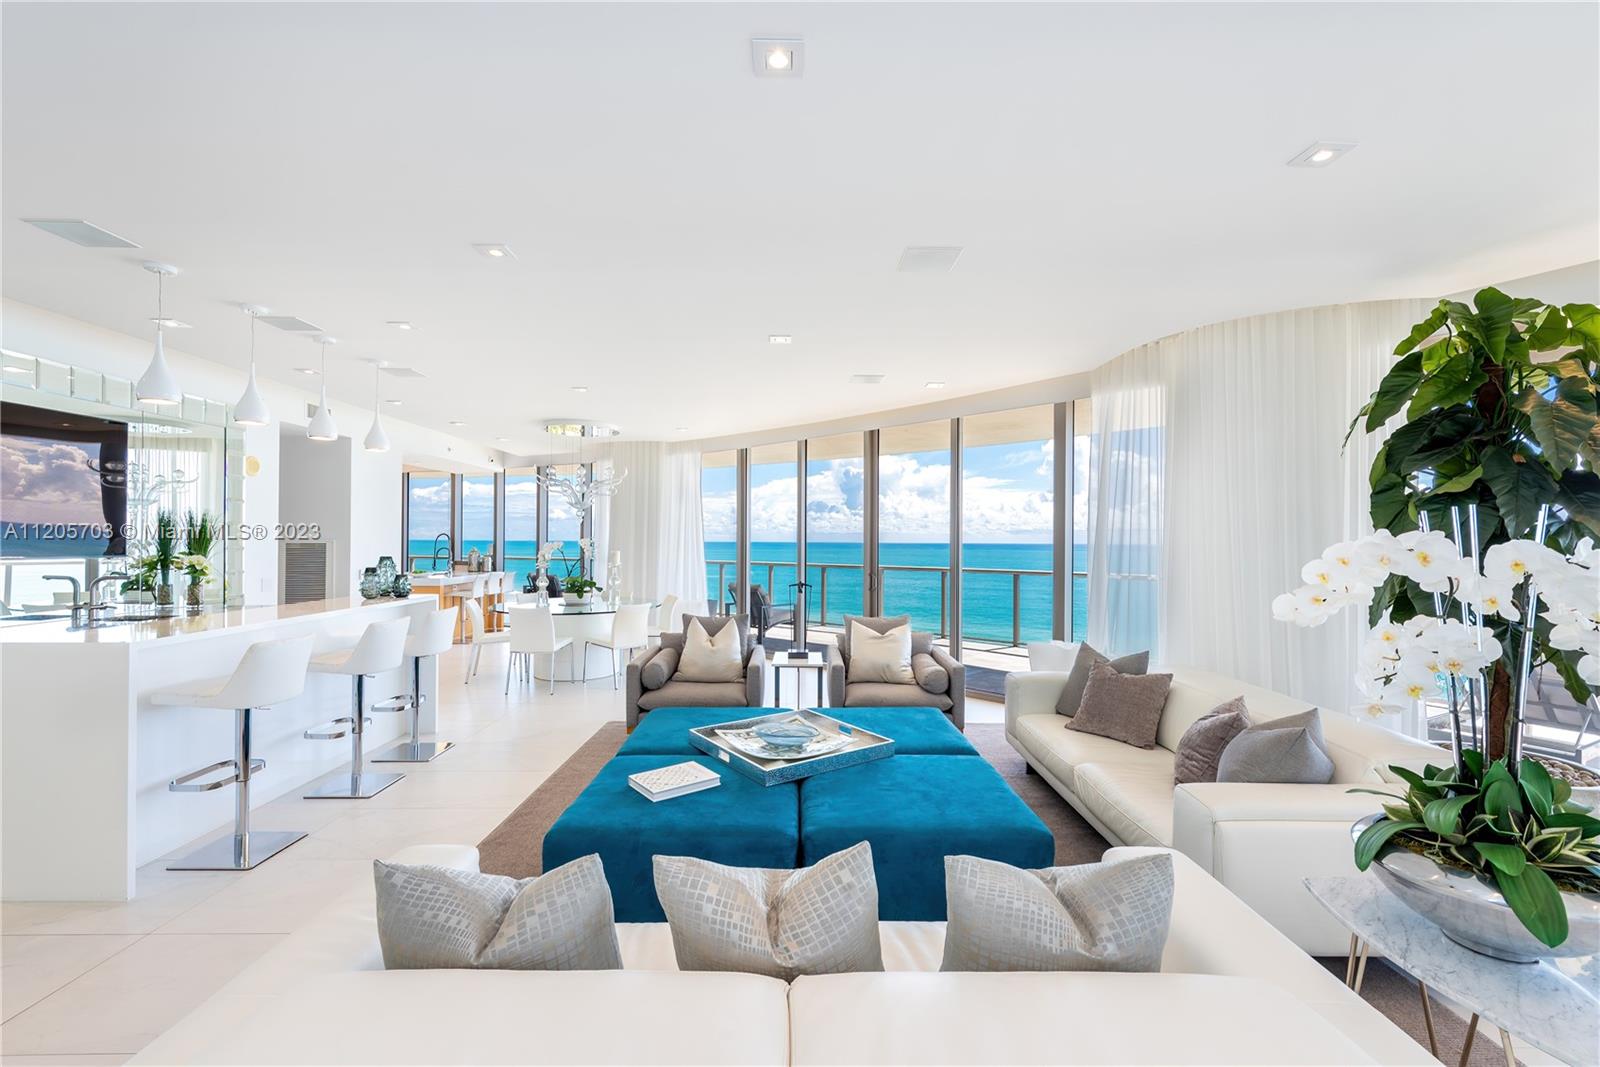 AUCTION: BID 8-14 JUNE. Currently Listed for $9.95M. No Reserve. Showings Daily by Appointment.  This luxurious Florida condo has unbeatable 180-degree direct ocean views with a huge rounded terrace to match.  The bright and modern interior has high ceilings, floor-to-ceiling windows throughout, and an open floor plan perfect for entertaining. The kitchen has a large island with beach views, tons of storage, and high-end appliances.   The primary suite has access to the balcony, tons of space, and a spa-like bathroom.  Owners have access to all of the St. Regis Hotel amenities like the 24hr concierge, gym and spa, on-site restaurants, and, of course, the beach and the three pools. Luxury beach living is waiting for you at this premier Florida property!